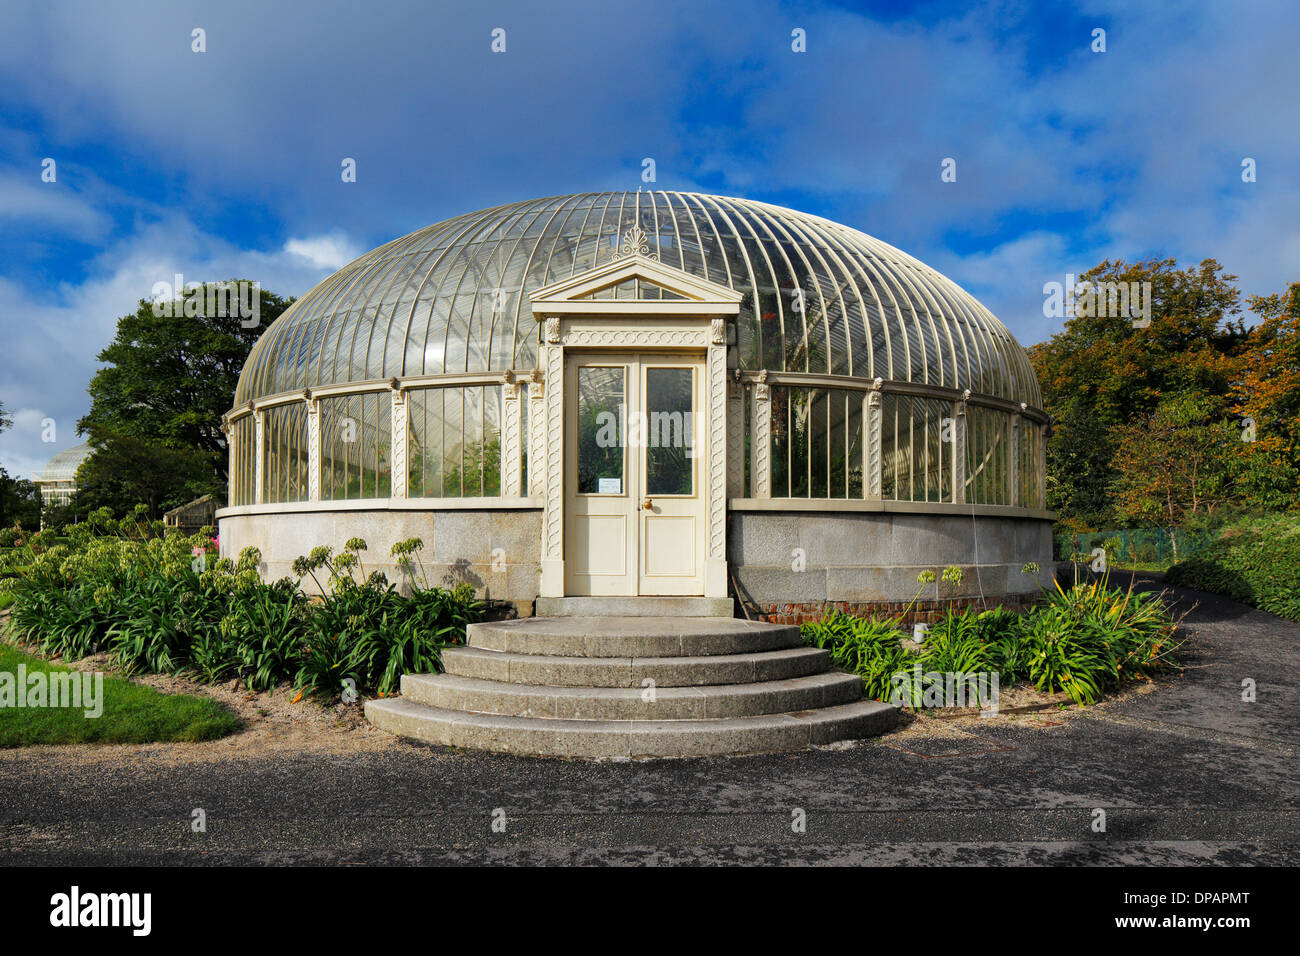 The side entrance to the long glasshouse of The National Botanic Gardens in Dublin, Ireland Stock Photo